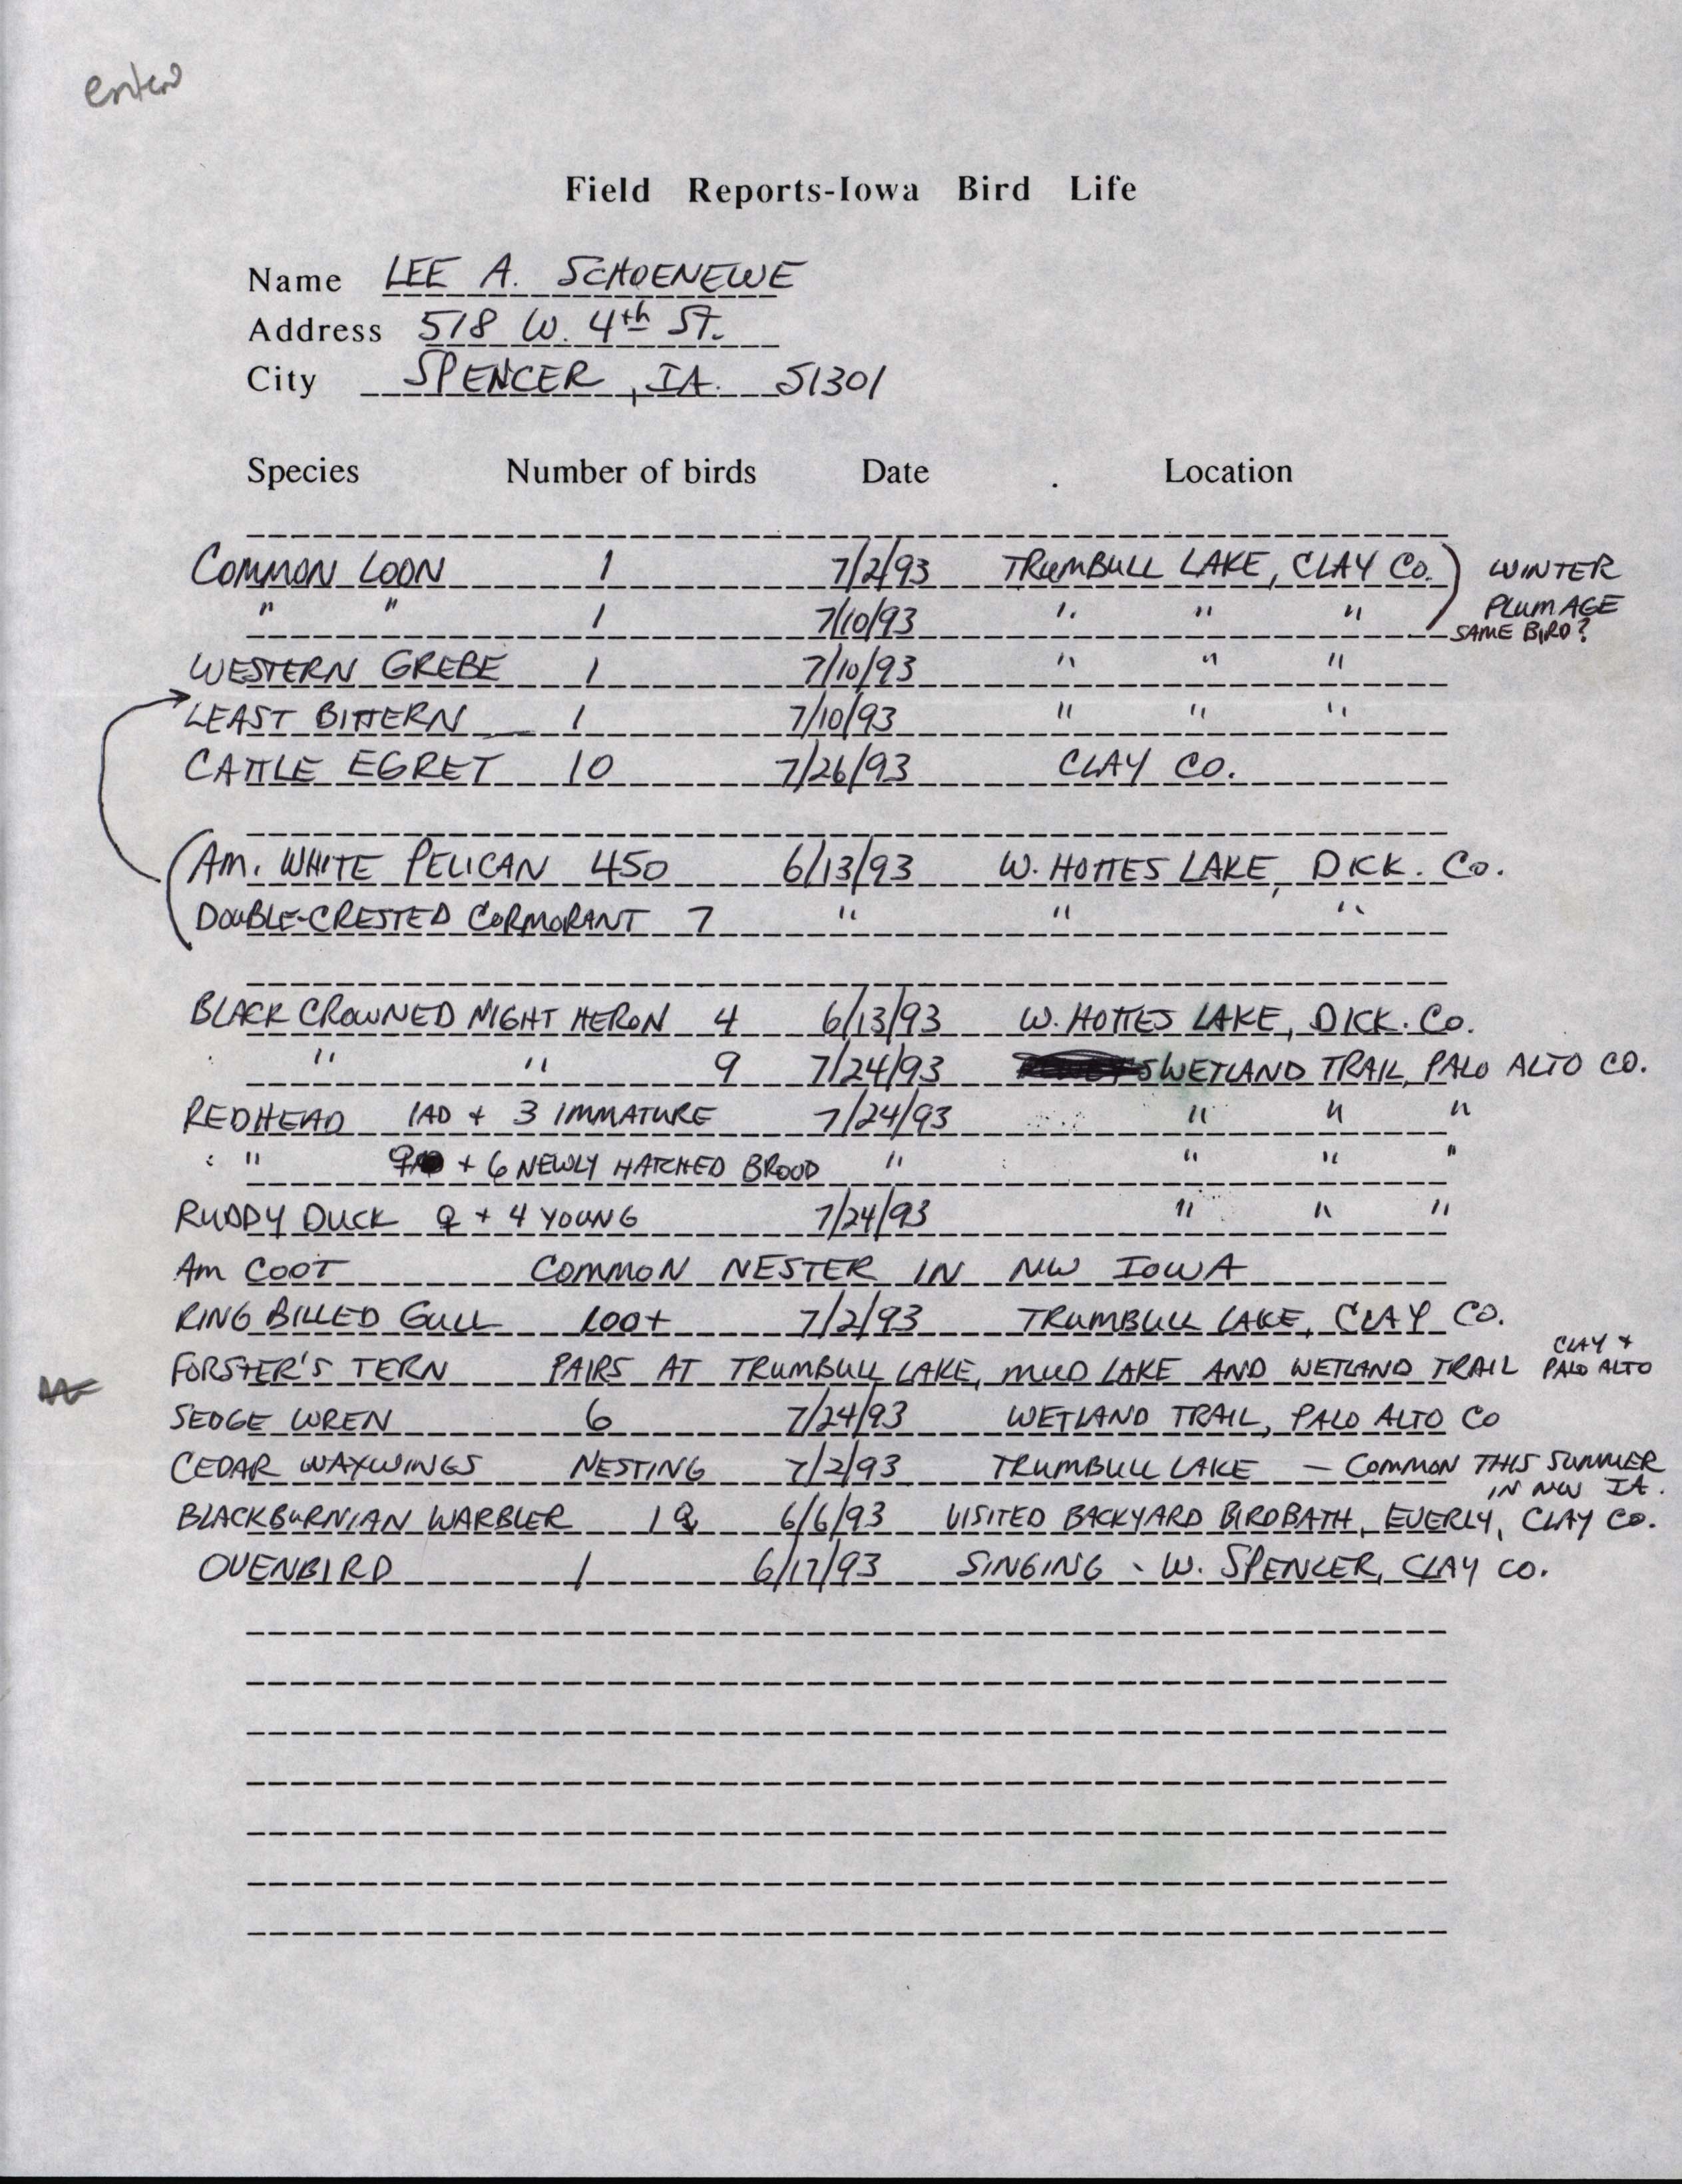 Field notes contributed by Lee A. Schoenewe, summer 1993